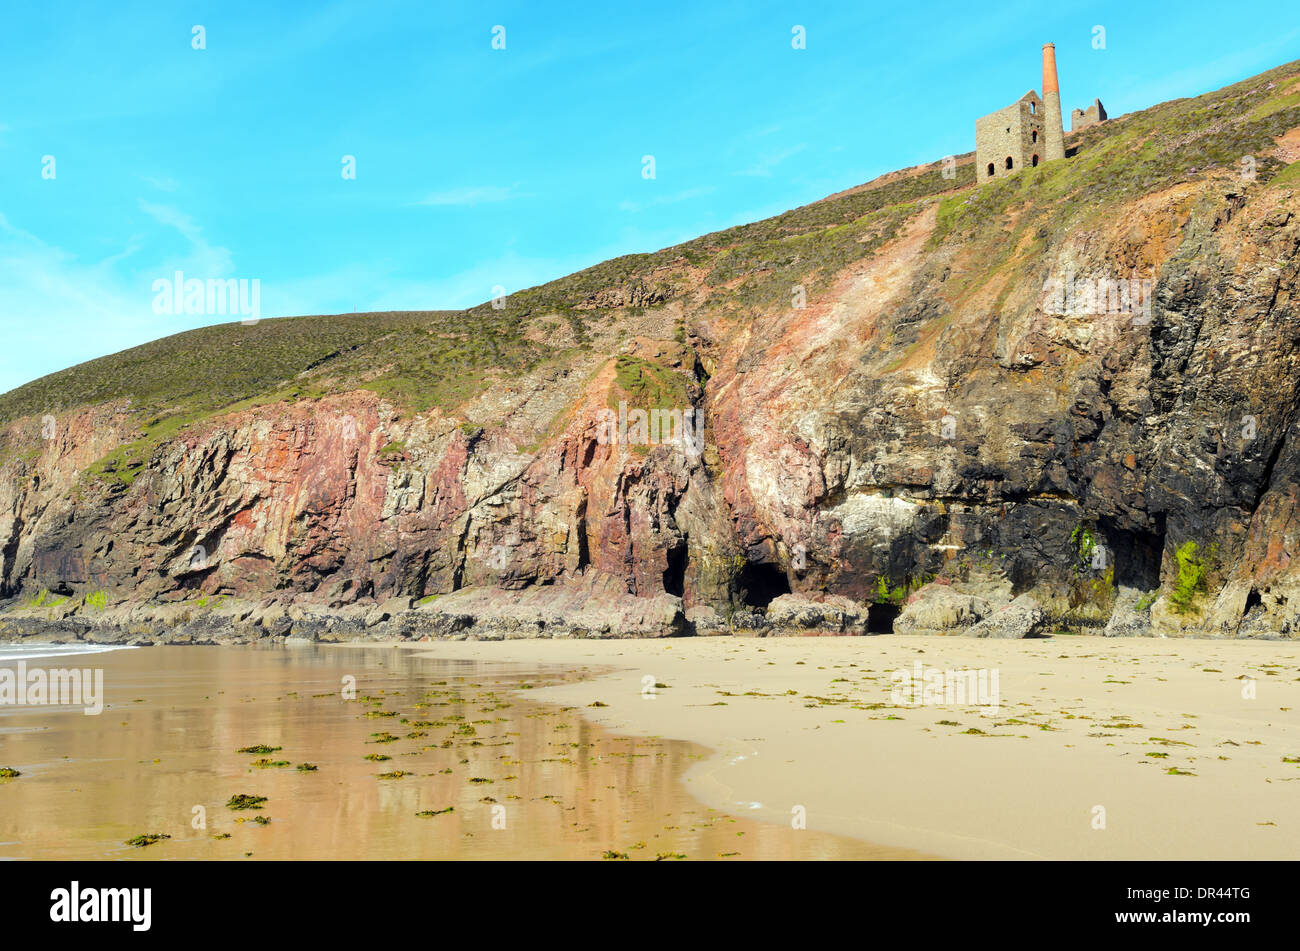 Chapel Porth beach and cliffs at low tide near St Agnes in Cornwall England Stock Photo